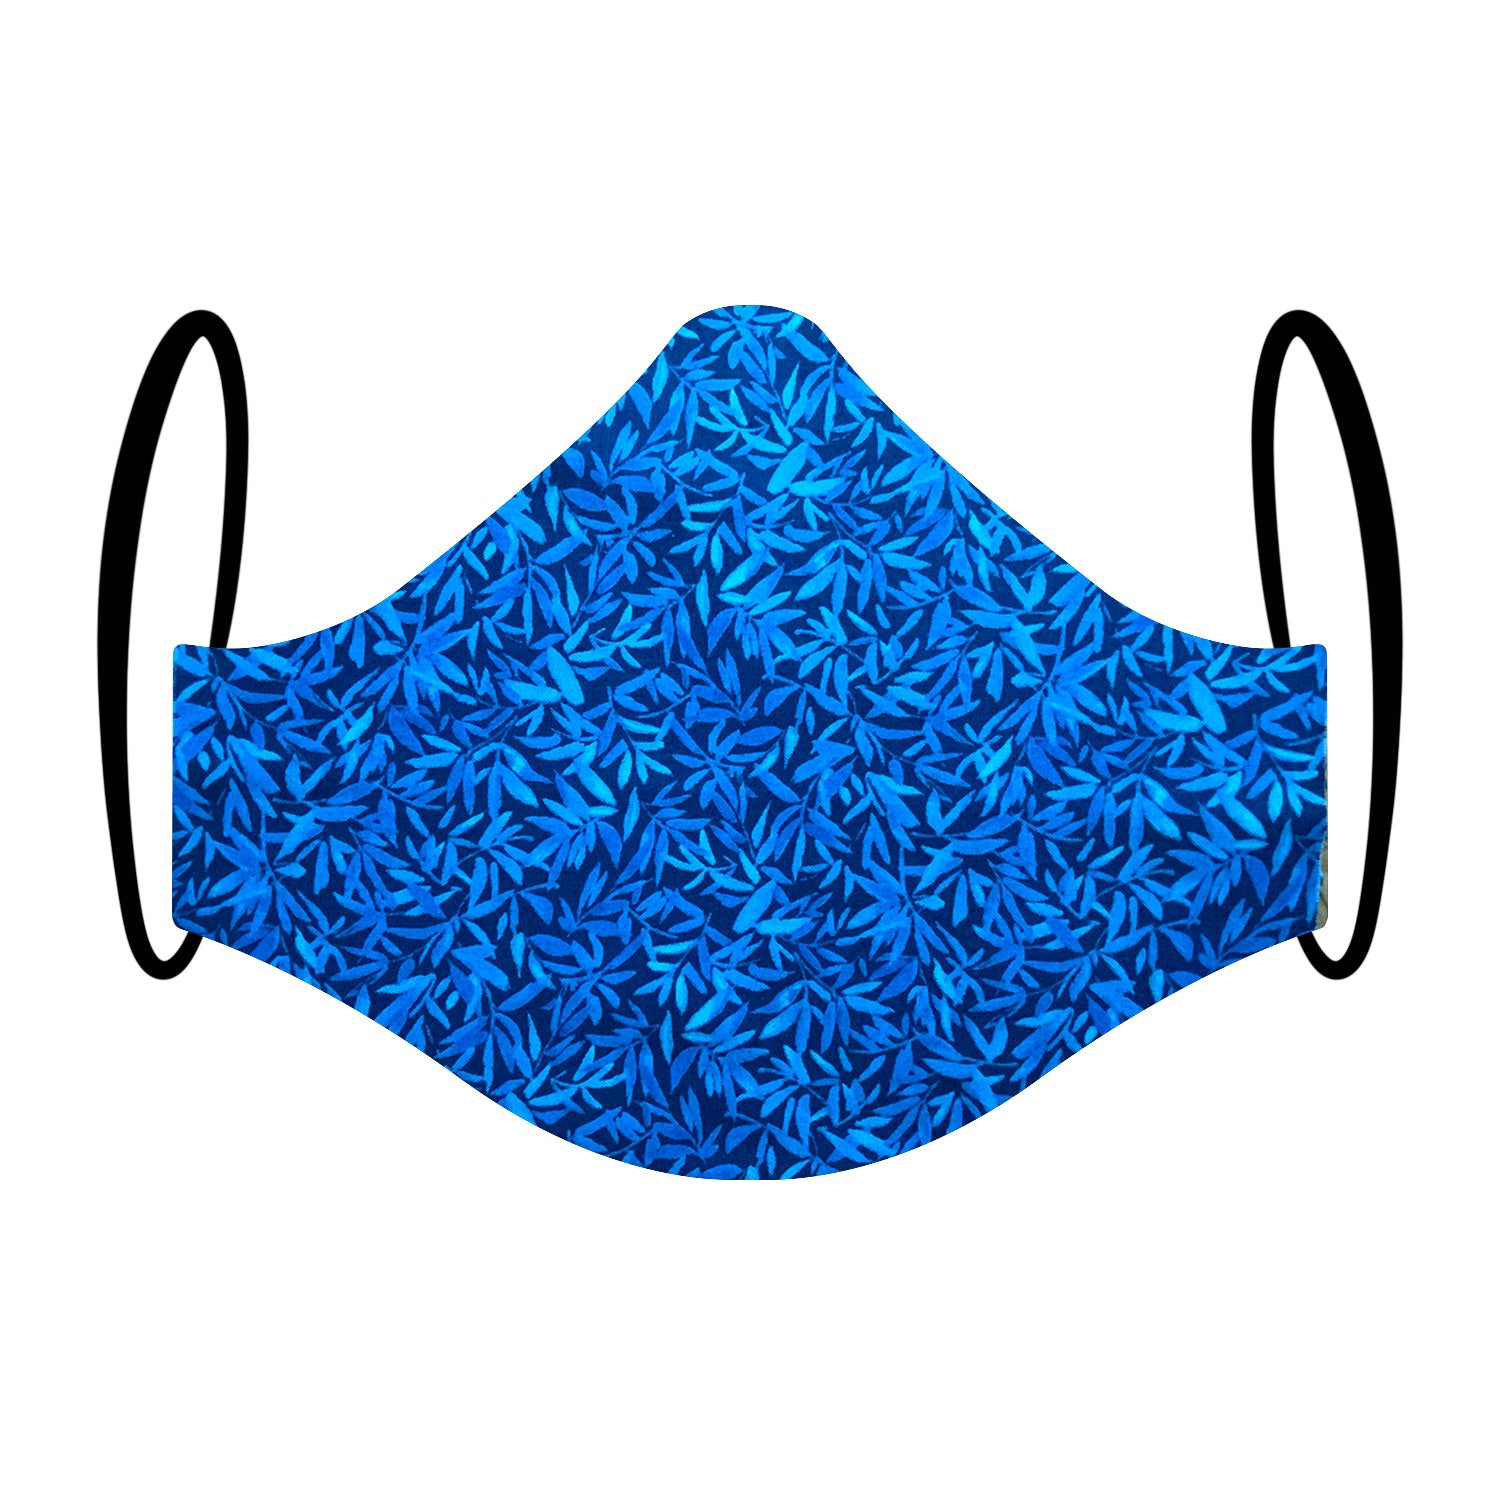 "Incognito" Blue Leaf Print Triple-layer Washable Face Mask